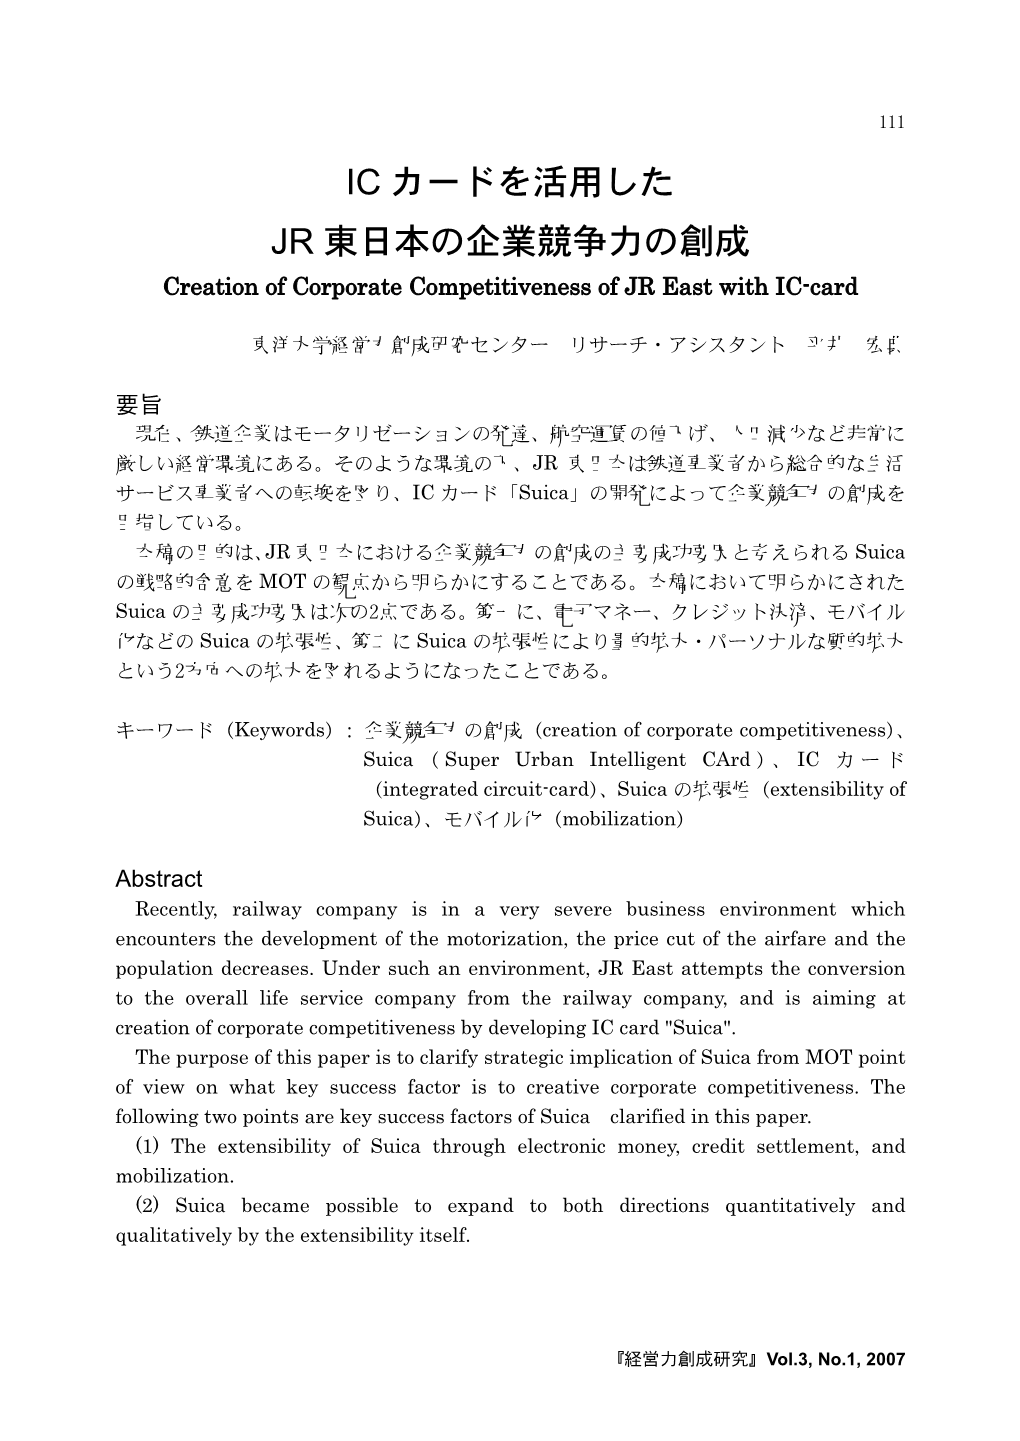 IC カードを活用した JR 東日本の企業競争力の創成 Creation of Corporate Competitiveness of JR East with IC-Card